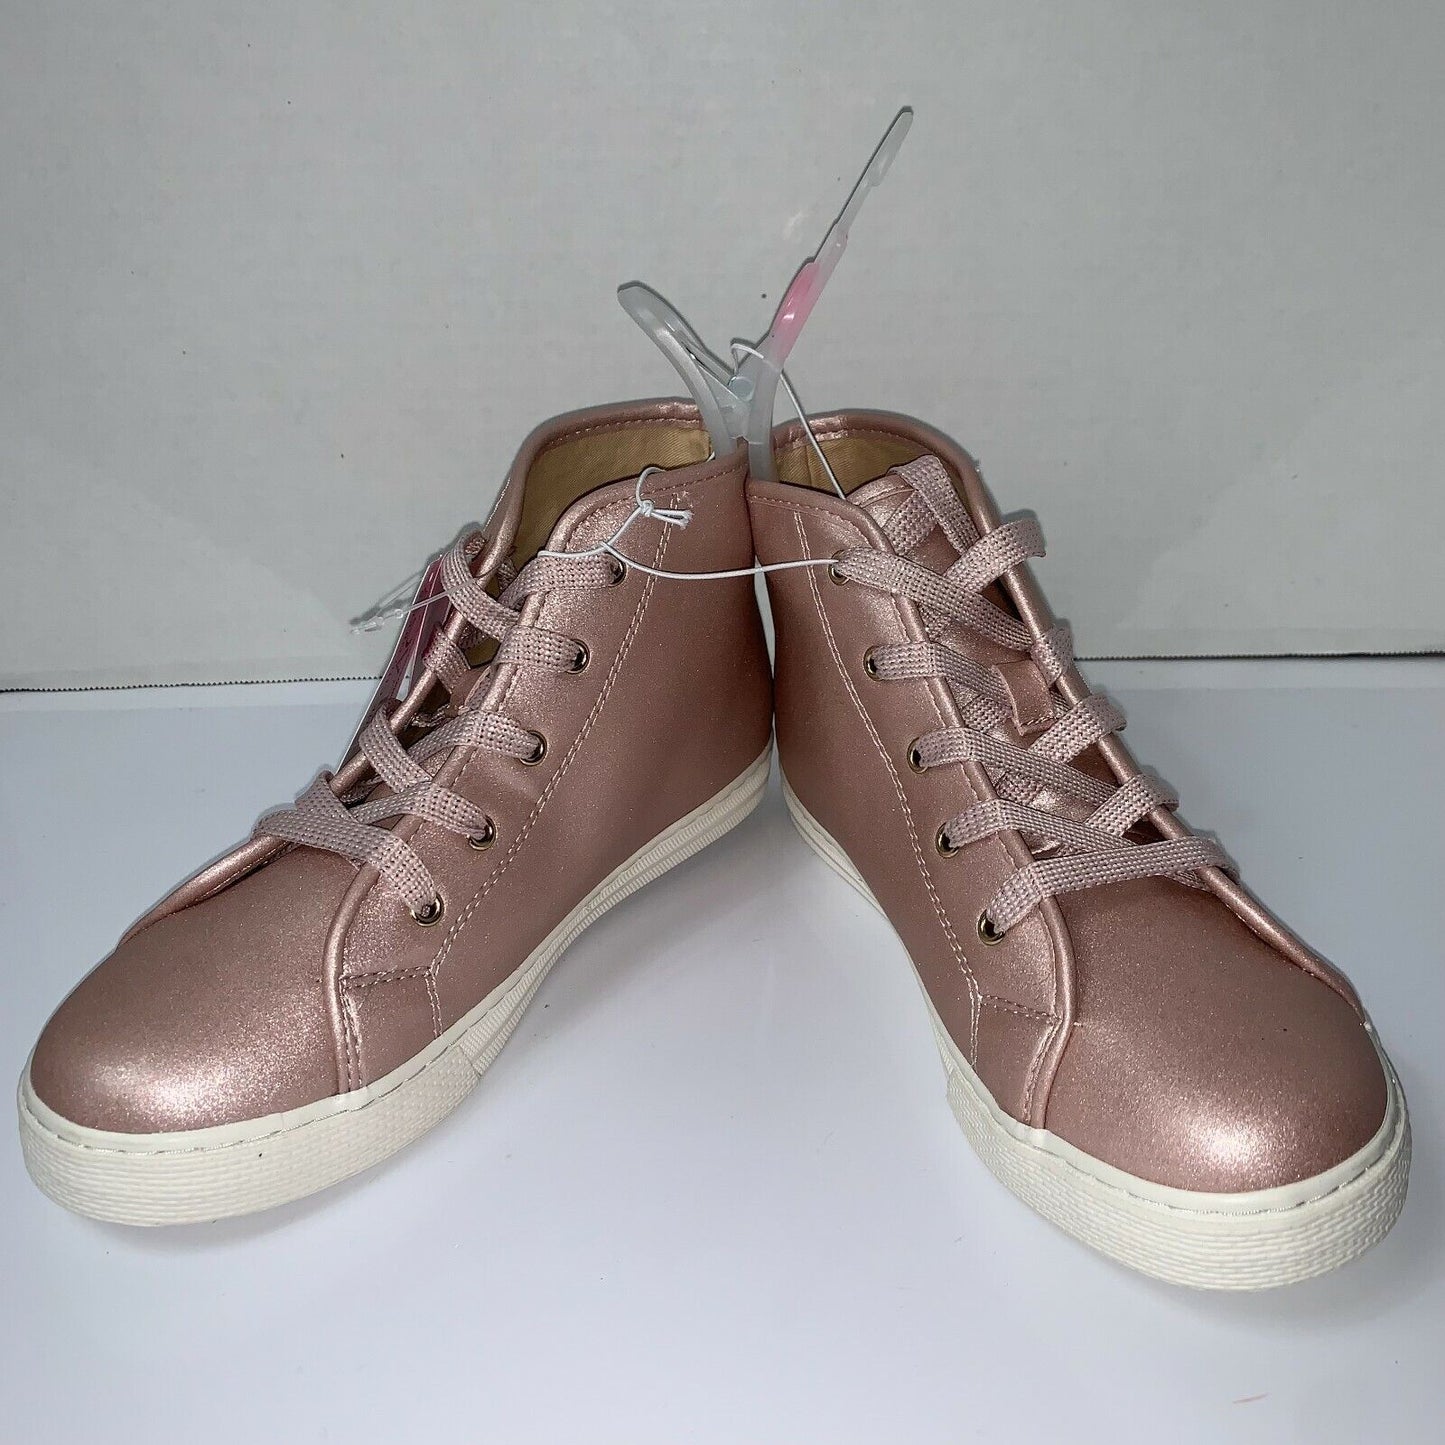 NEW Children's Place Sneakers Pink, Glitter Girl's Sz 6